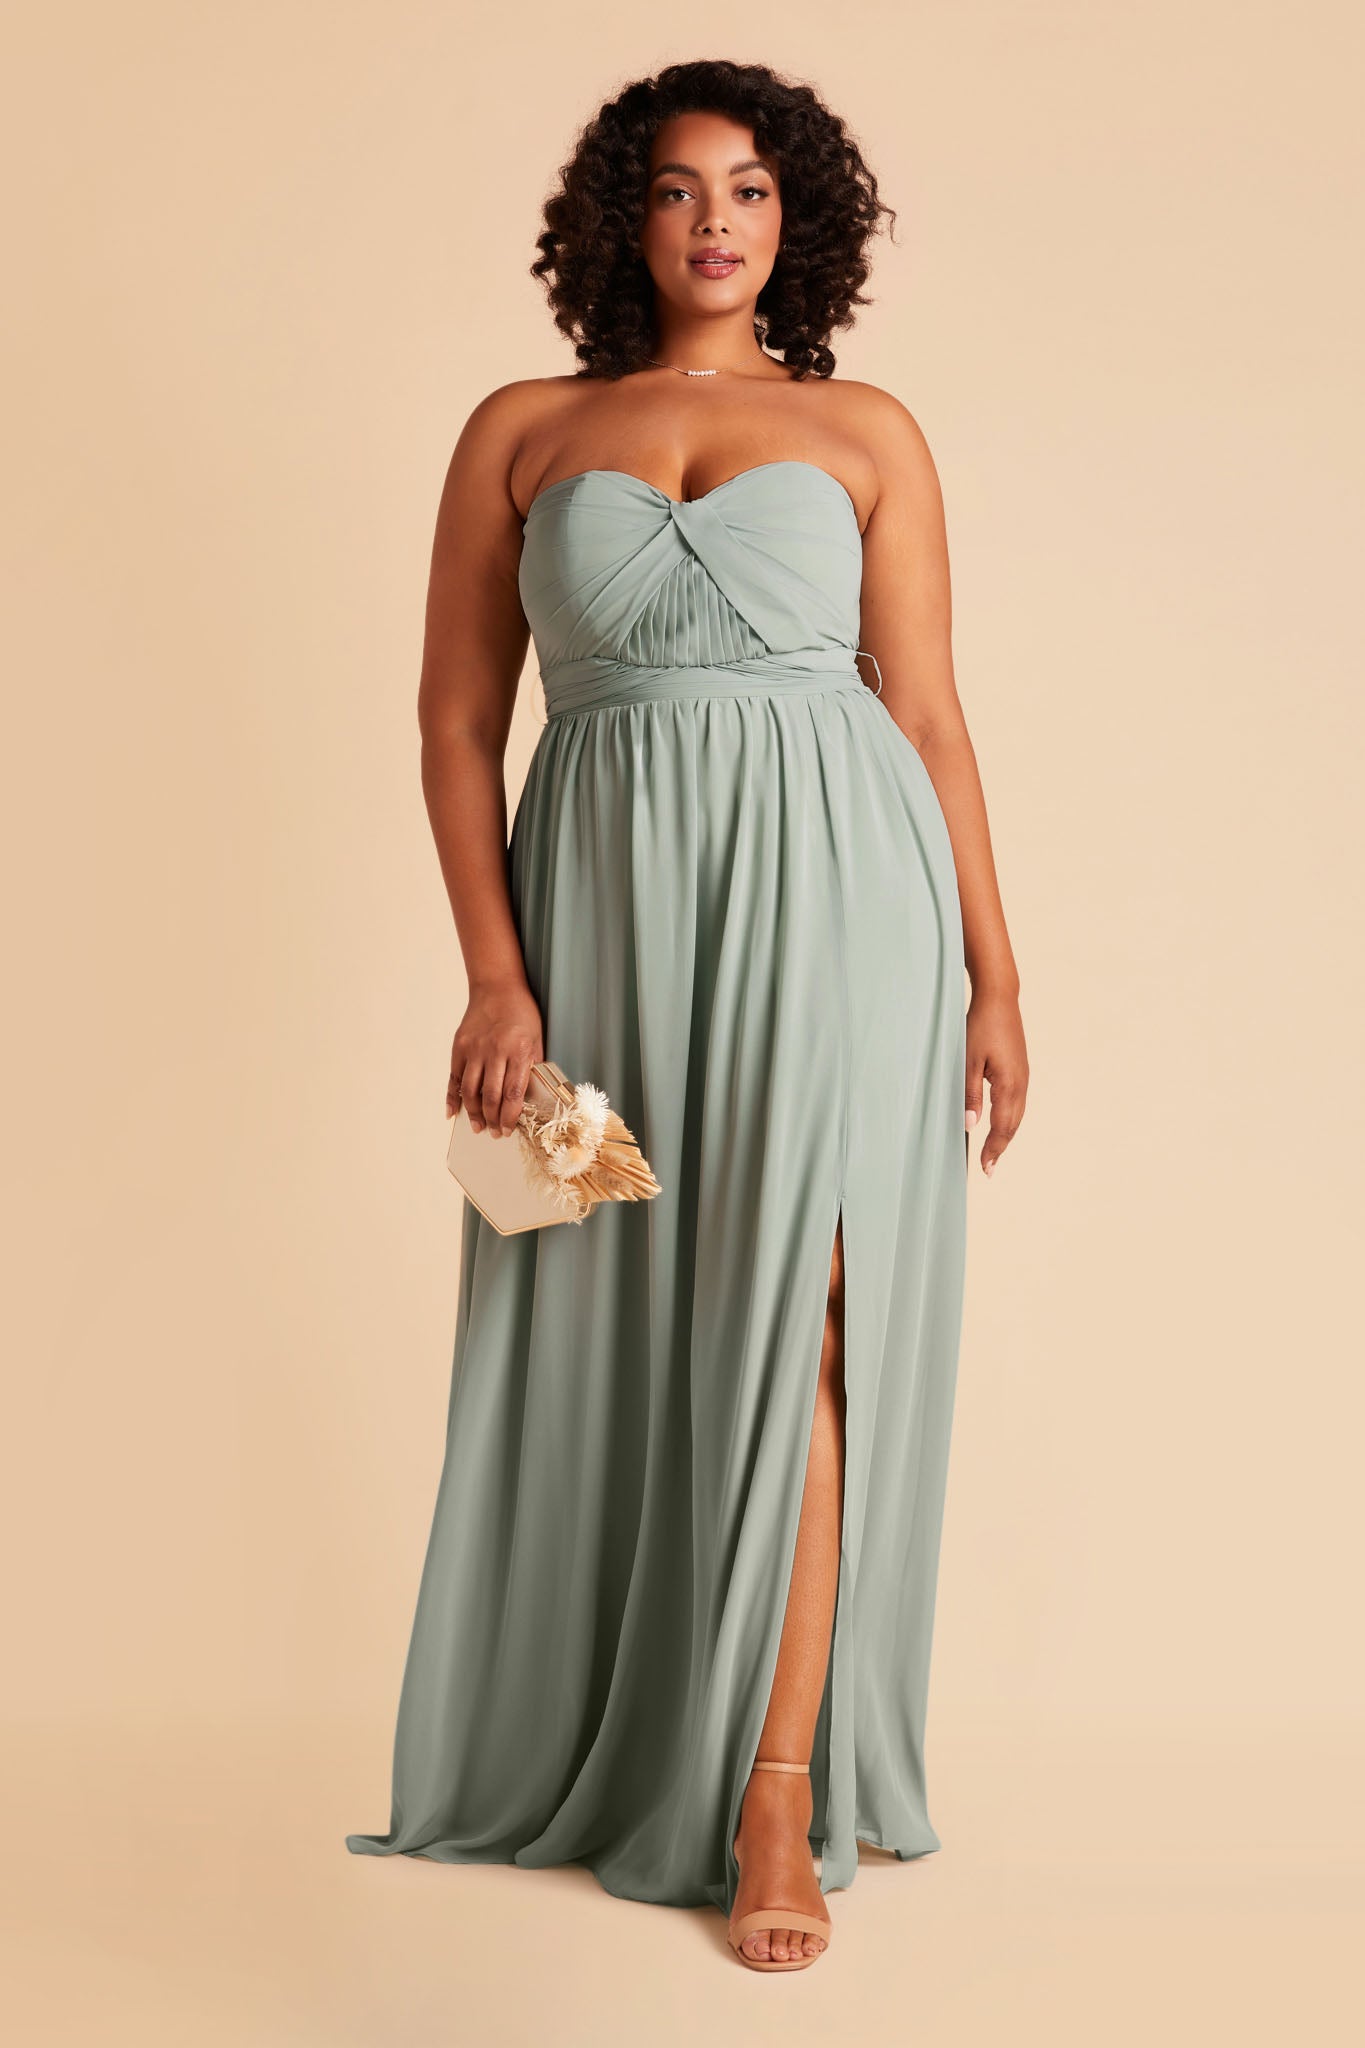 Front view of the Grace Convertible Plus Size Bridesmaid Dress in sage chiffon by Birdy Grey features a sweetheart neckline and a slit in the flowing floor-length skirt over the left leg.